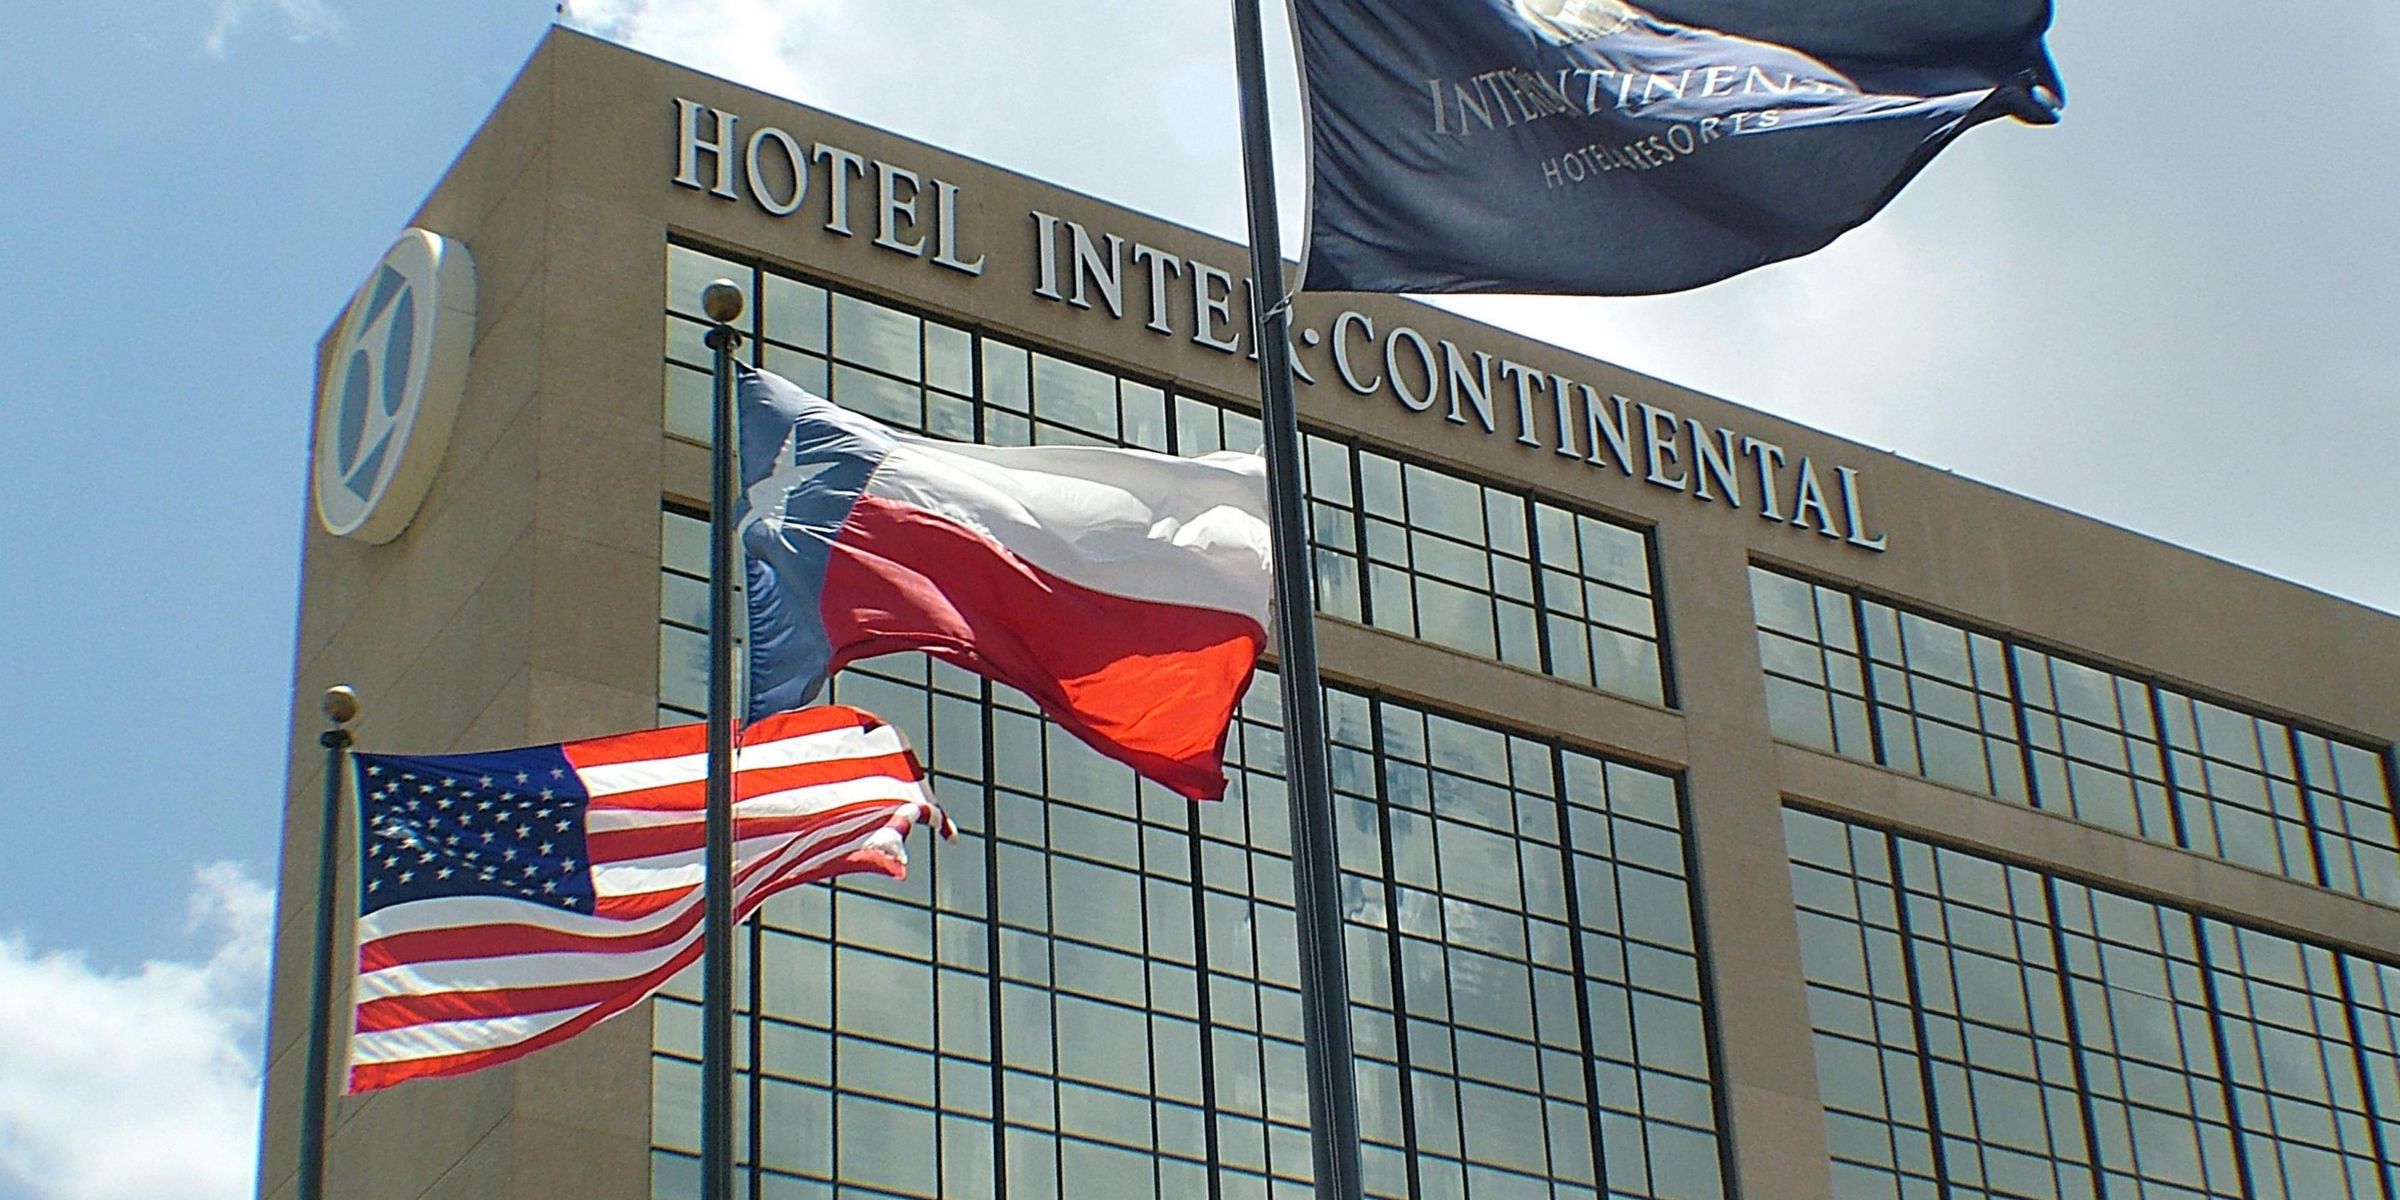 The hotel will reopen as the Renaissance Dallas Addison following a full rebranding and renovation